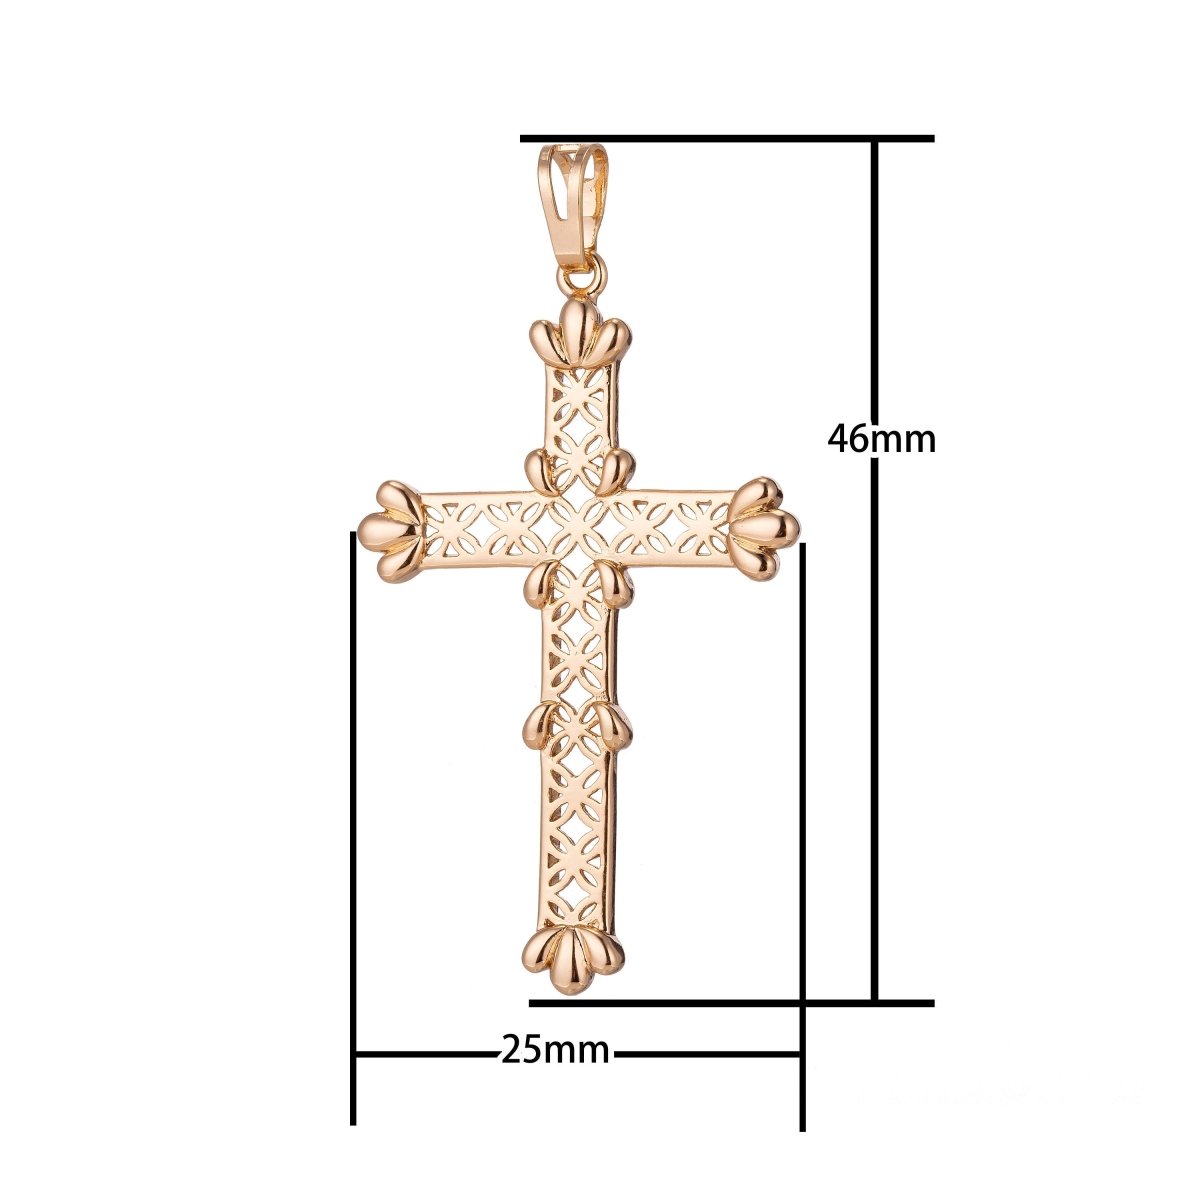 Big Cross Charm, 18K Gold Filled Pendant Dainty Cross Necklace Charm for Jewelry Making H-889 - DLUXCA